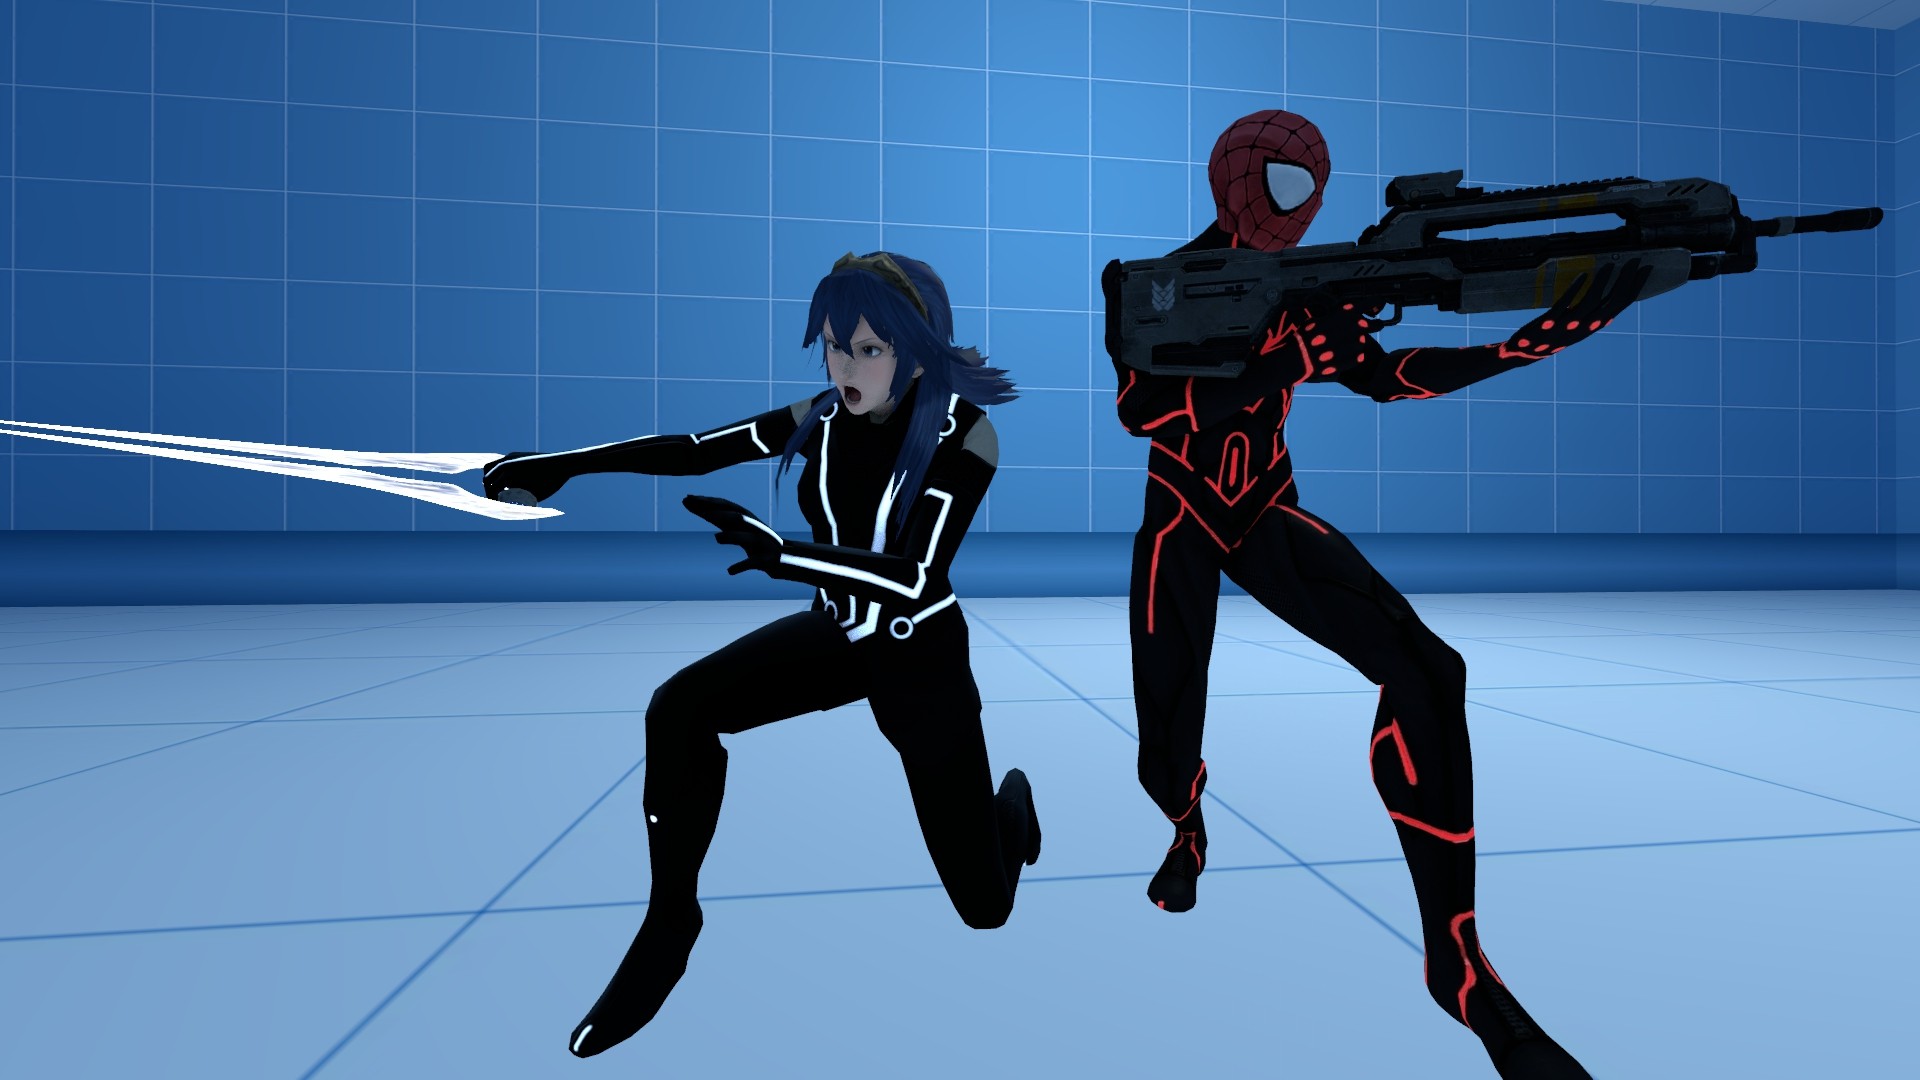 1920x1080 ... kongzillarex619 Lucina and Spider-Man in Tron outfits by kong...